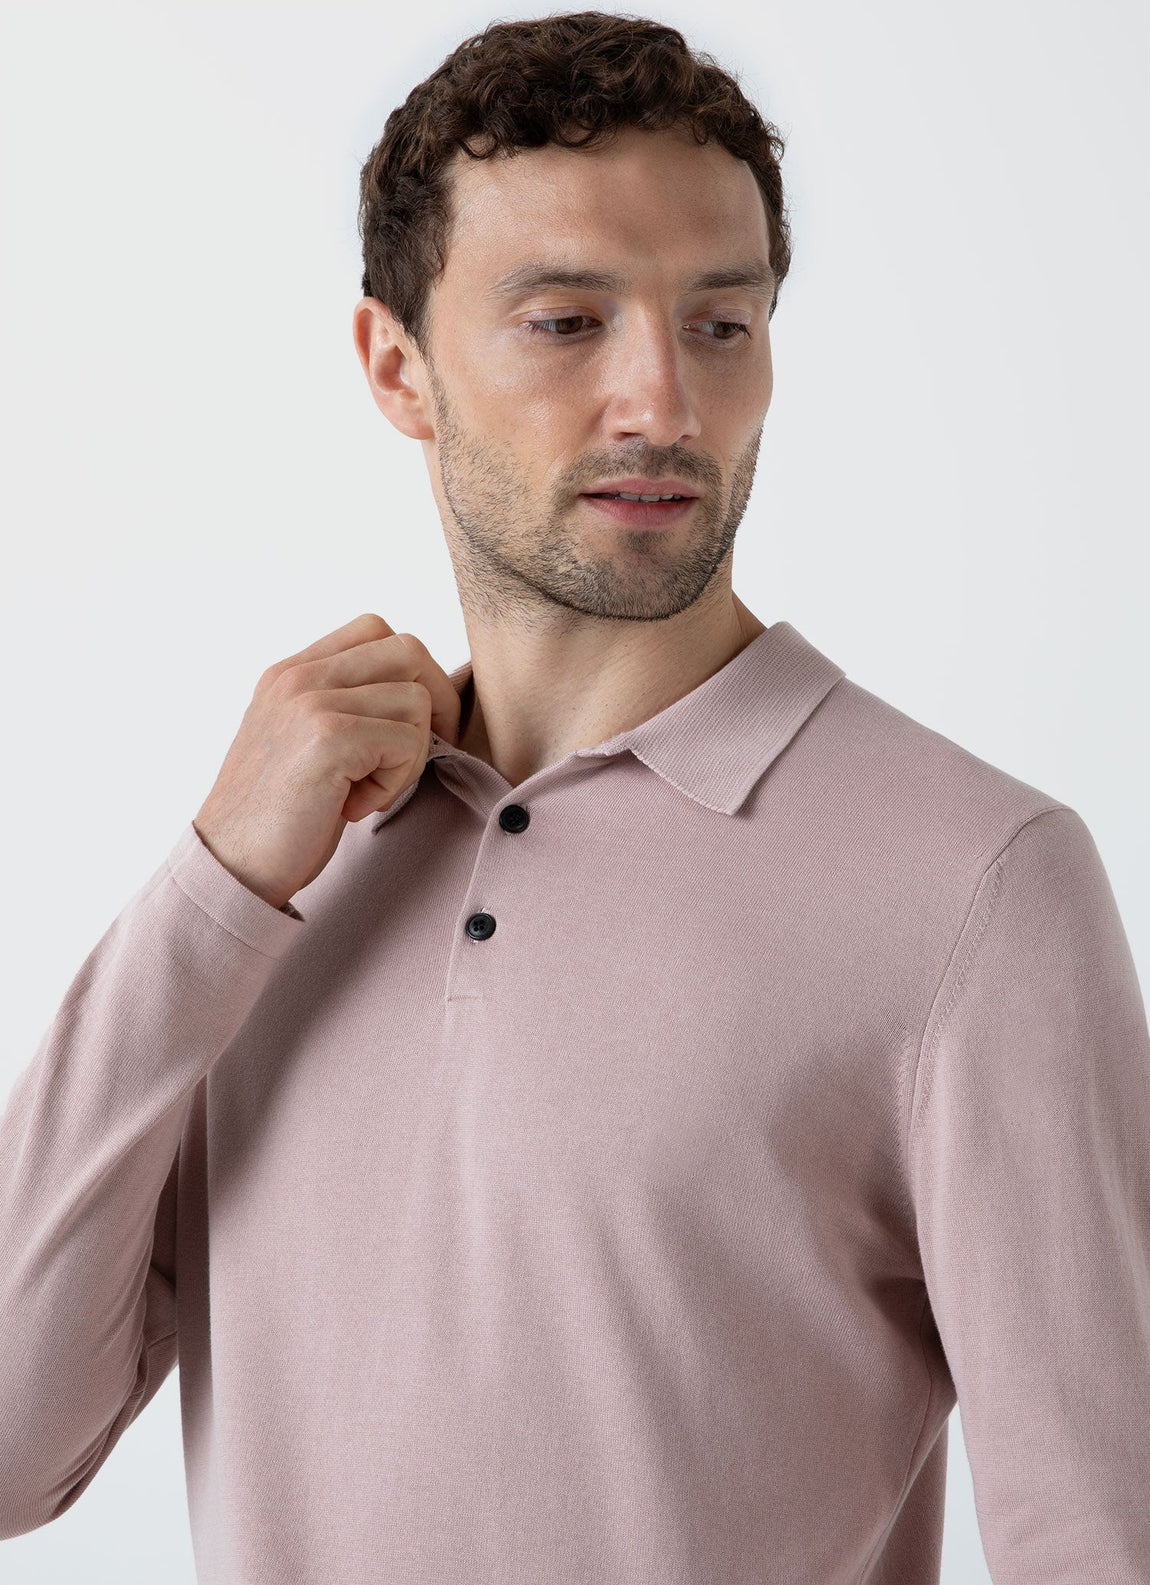 Men's Long Sleeve Sea Island Cotton Polo Shirt in Pale Pink